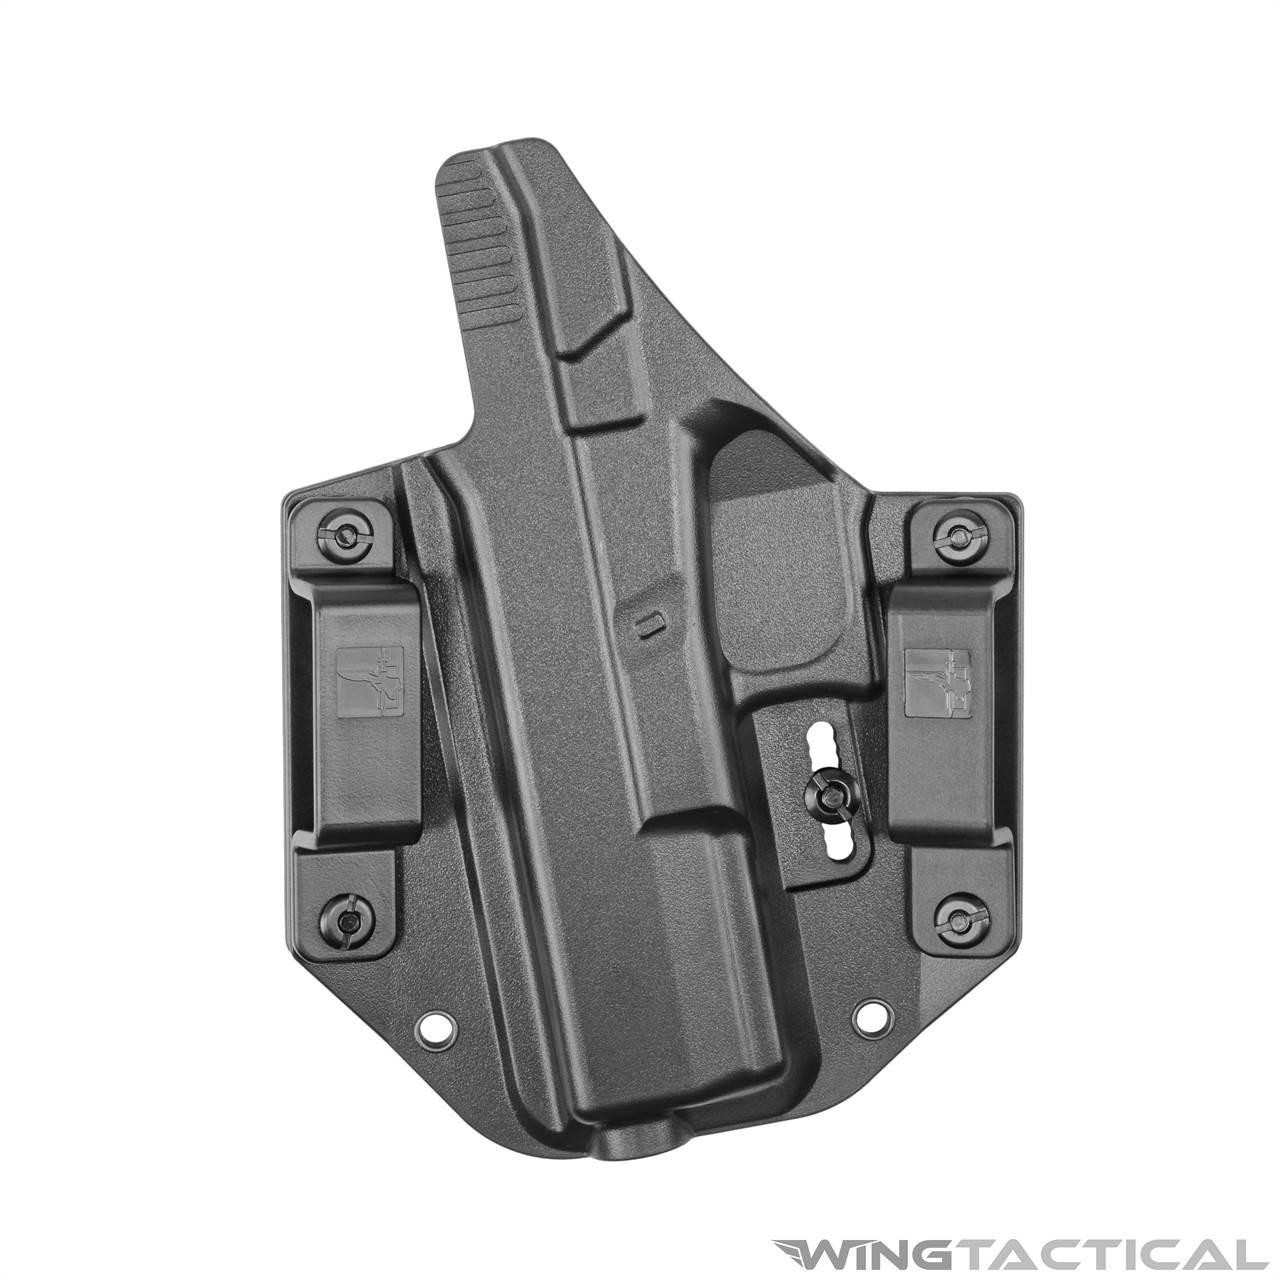 Bravo Concealment Adaptive OWB Holster for Glock 17, 22, 31